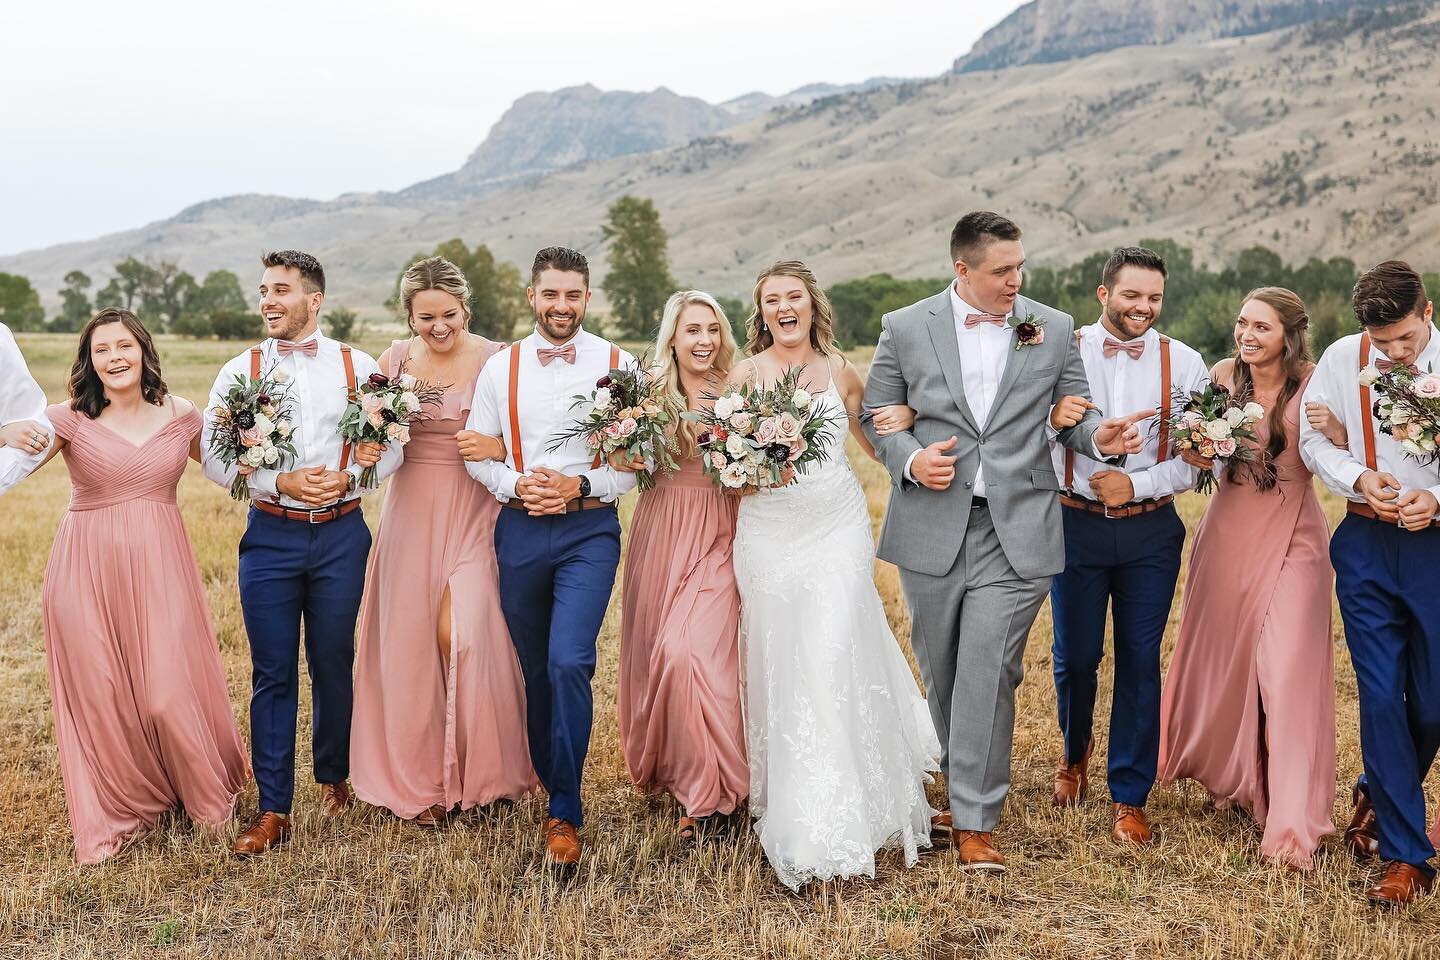 The colors all play so well together with that pop of blue from the groomsmen wouldn't you agree?!
Lovely Bride &amp; Groom: @soph_mcclure &amp; Cap
Photo Credit: @saranagelphotography

#localflowers #weddingflorist #wyomingflorist #montanaflorist #c